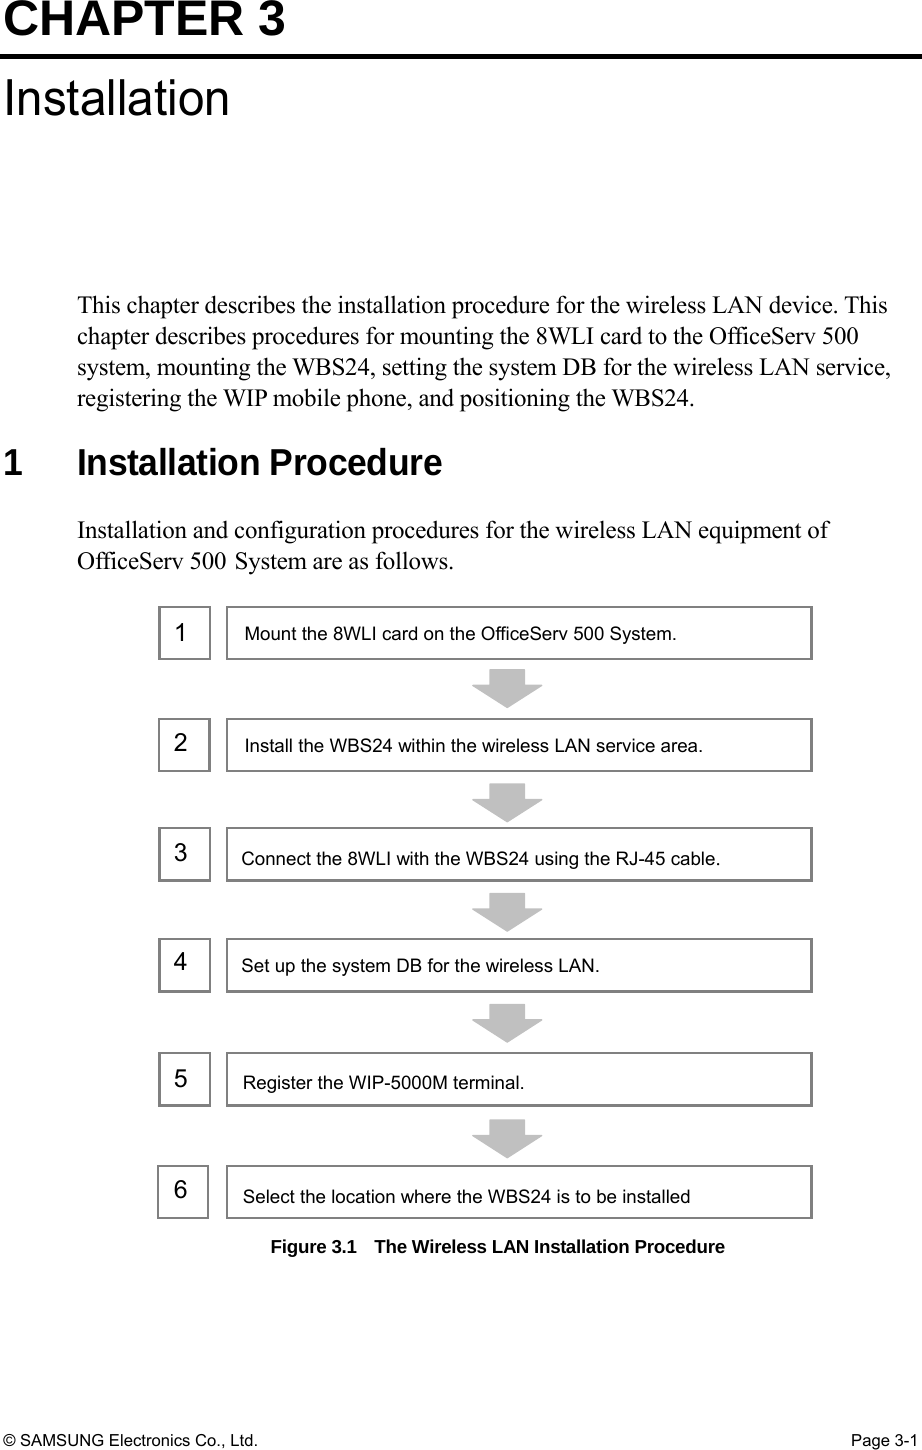 CHAPTER 3 © SAMSUNG Electronics Co., Ltd.  Page 3-1 Installation This chapter describes the installation procedure for the wireless LAN device. This chapter describes procedures for mounting the 8WLI card to the OfficeServ 500 system, mounting the WBS24, setting the system DB for the wireless LAN service, registering the WIP mobile phone, and positioning the WBS24.  1 Installation Procedure Installation and configuration procedures for the wireless LAN equipment of OfficeServ 500 System are as follows. Figure 3.1    The Wireless LAN Installation Procedure Mount the 8WLI card on the OfficeServ 500 System.Install the WBS24 within the wireless LAN service area. Connect the 8WLI with the WBS24 using the RJ-45 cable. Register the WIP-5000M terminal.Select the location where the WBS24 is to be installed1 Set up the system DB for the wireless LAN.2 3 4 5 6 